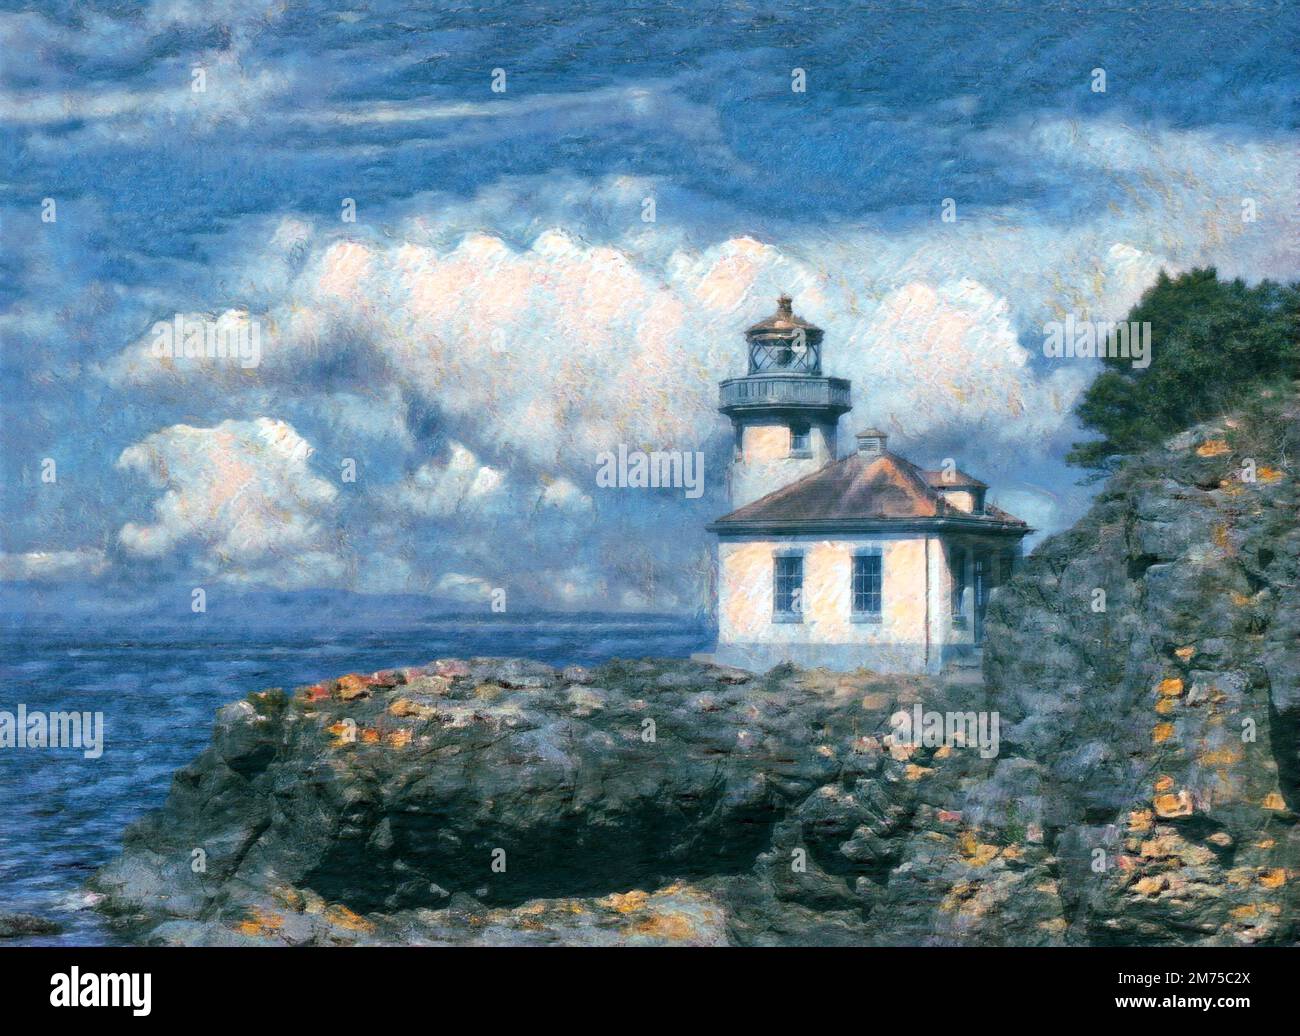 Digital painting effect on photo of lighthouse on the Puget Sound of Washington state during nice day with blue sky and clouds Stock Photo